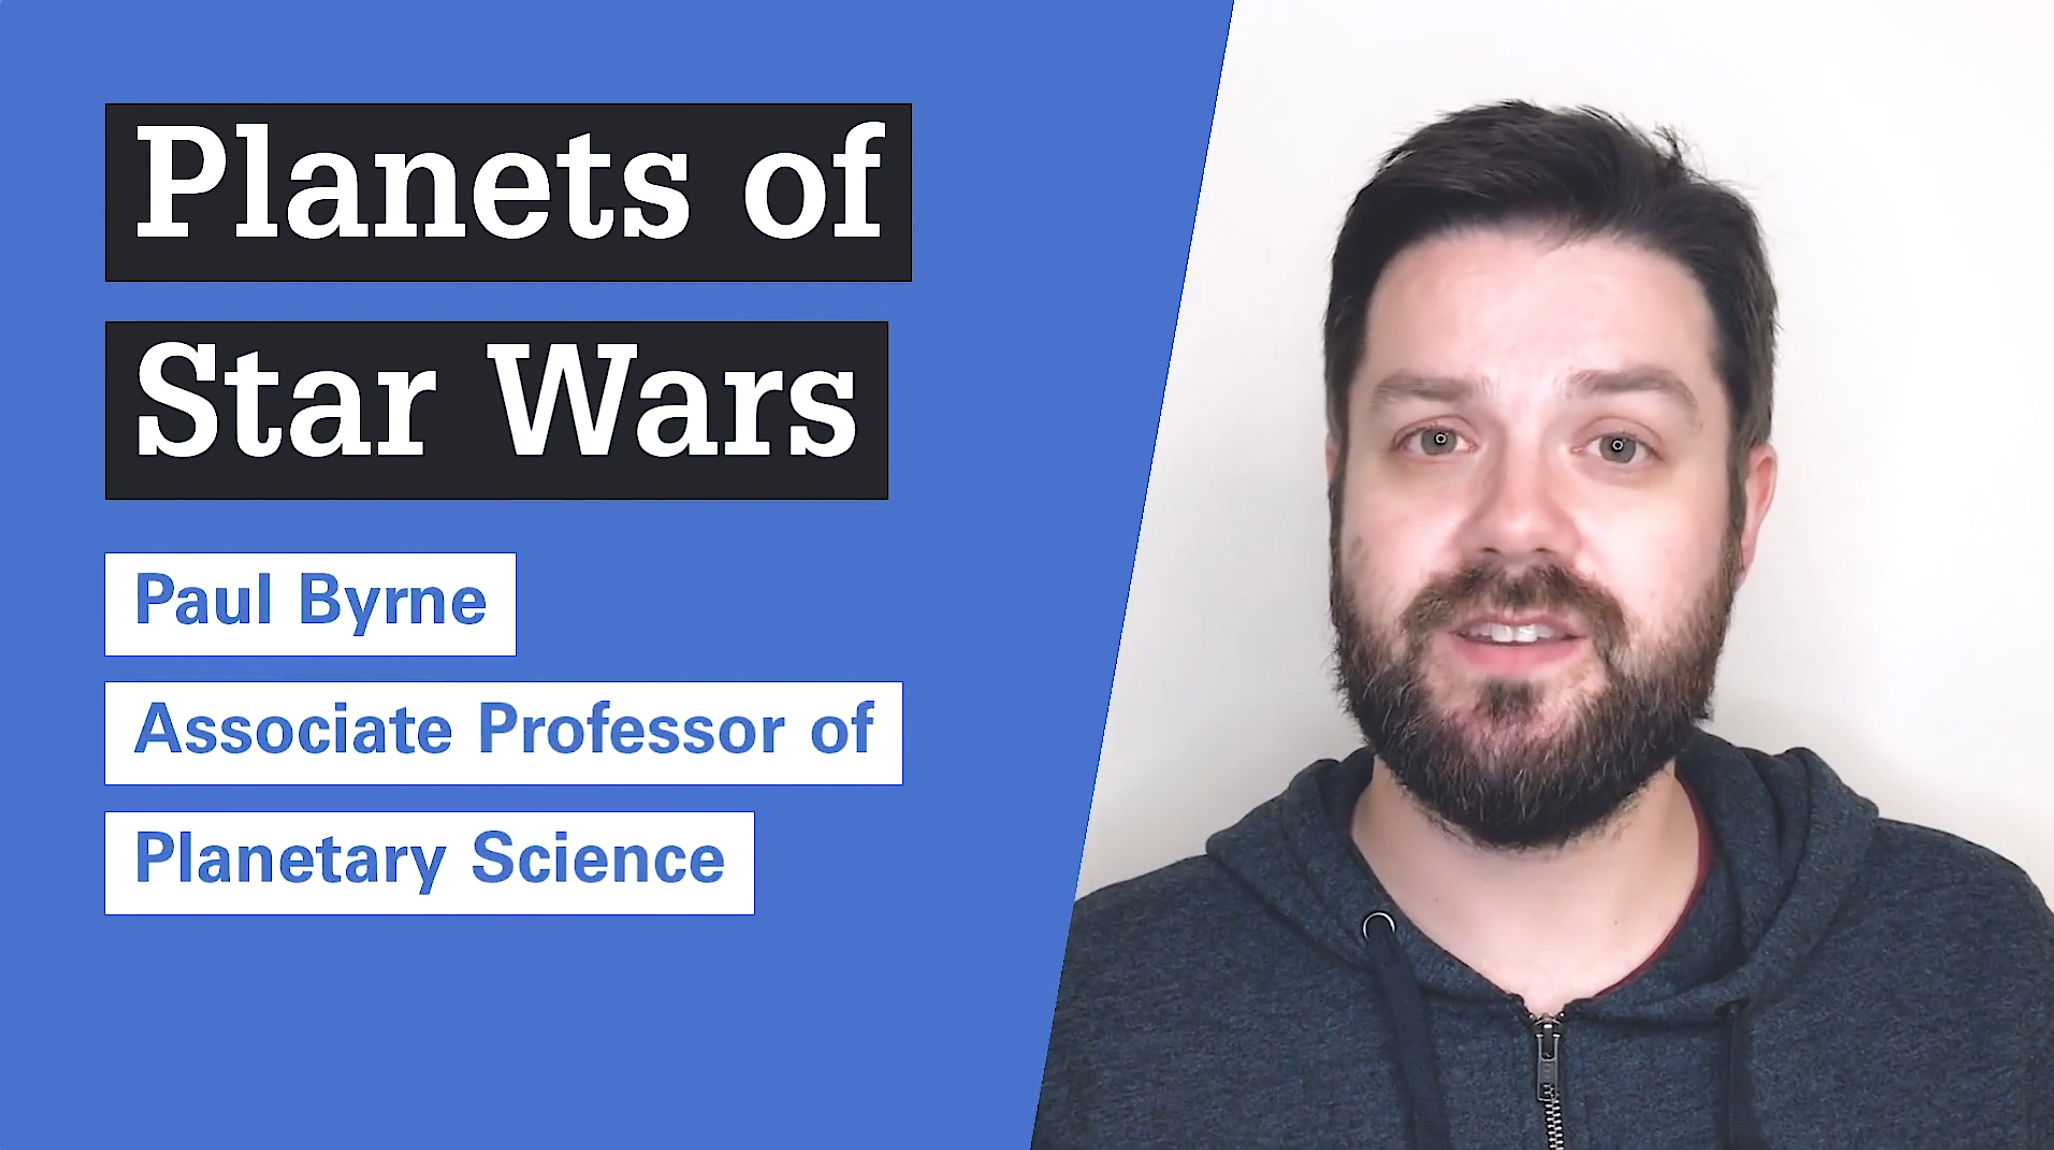 NC State College of Sciences professor Paul Byrne answers questions about the planets in Star Wars.